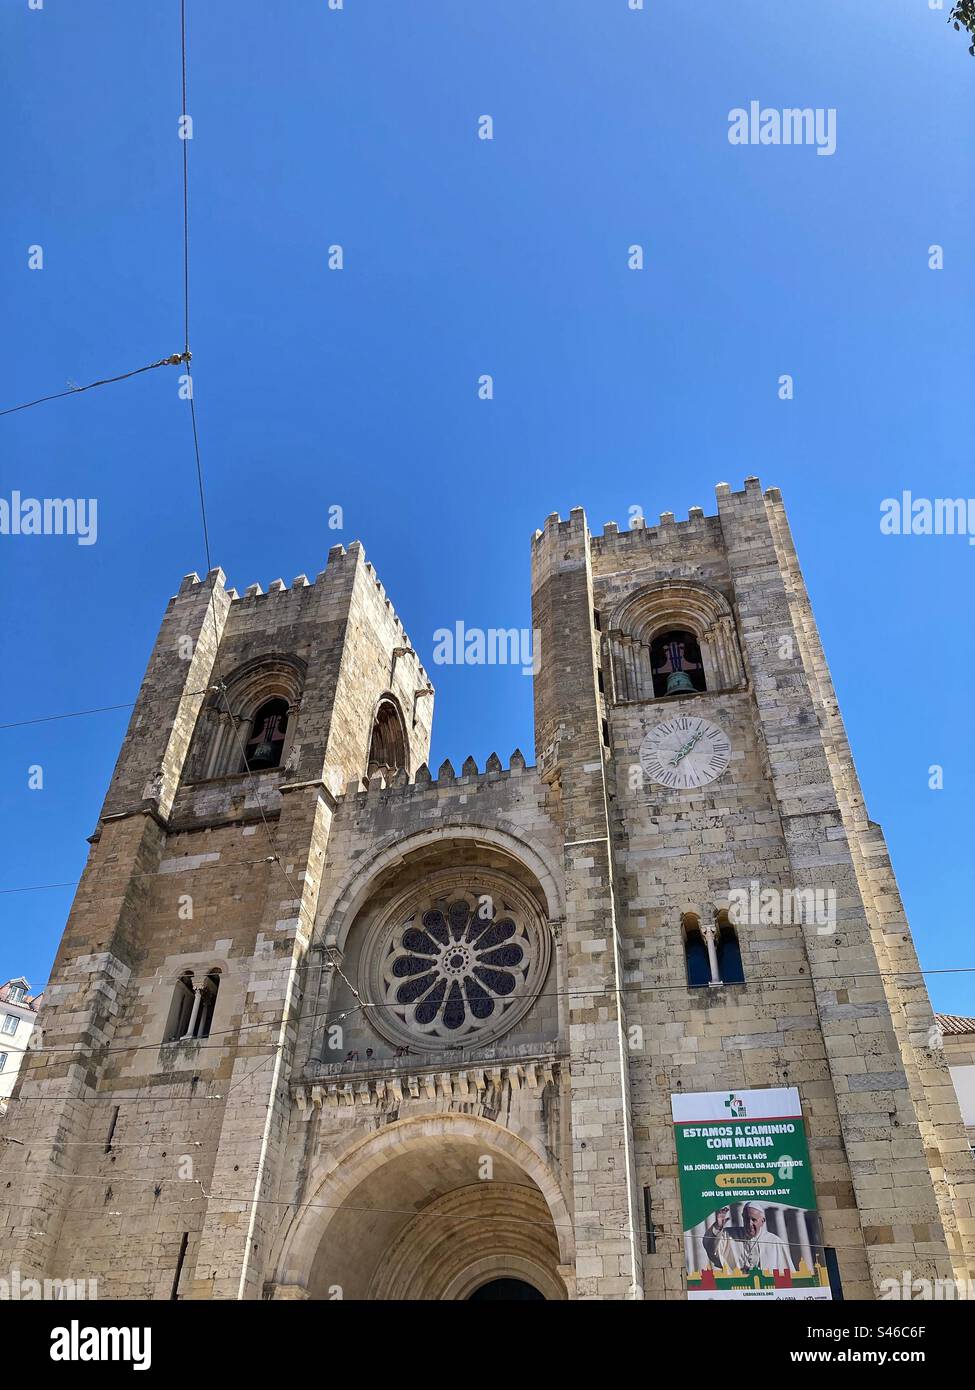 Se de Lisboa ( Cathedral of Saint Mary Major . The oldest church in the city of Lisbon. First built in 1147. Here with a poster about the JMJ  and visit -August 2023-of pope Francis to the city Stock Photo